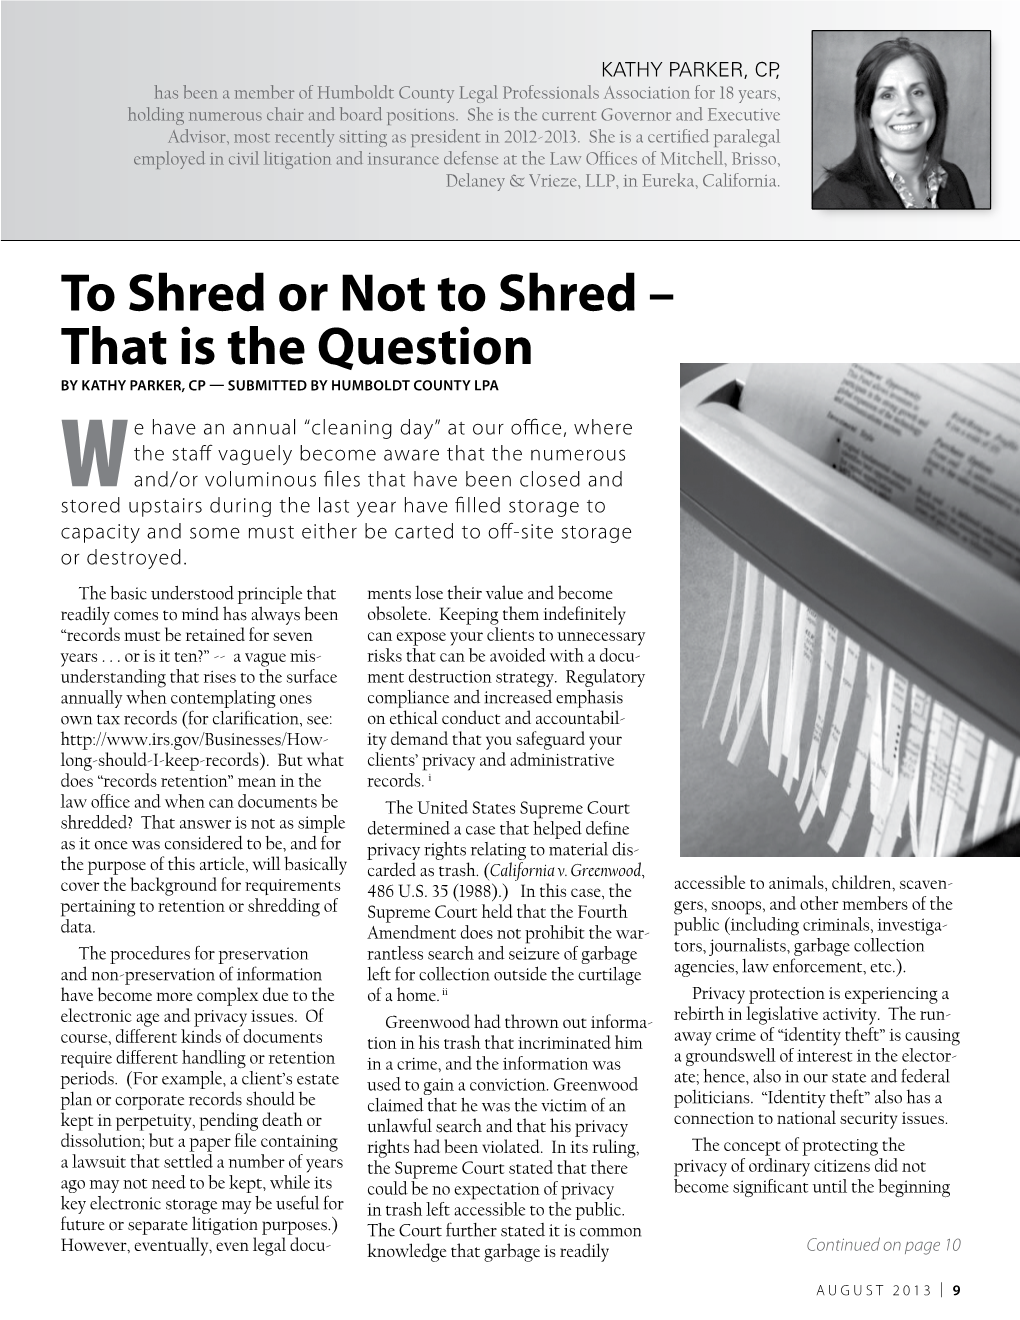 To Shred Or Not to Shred – That Is the Question by Kathy Parker, CP — Submitted by Humboldt County LPA